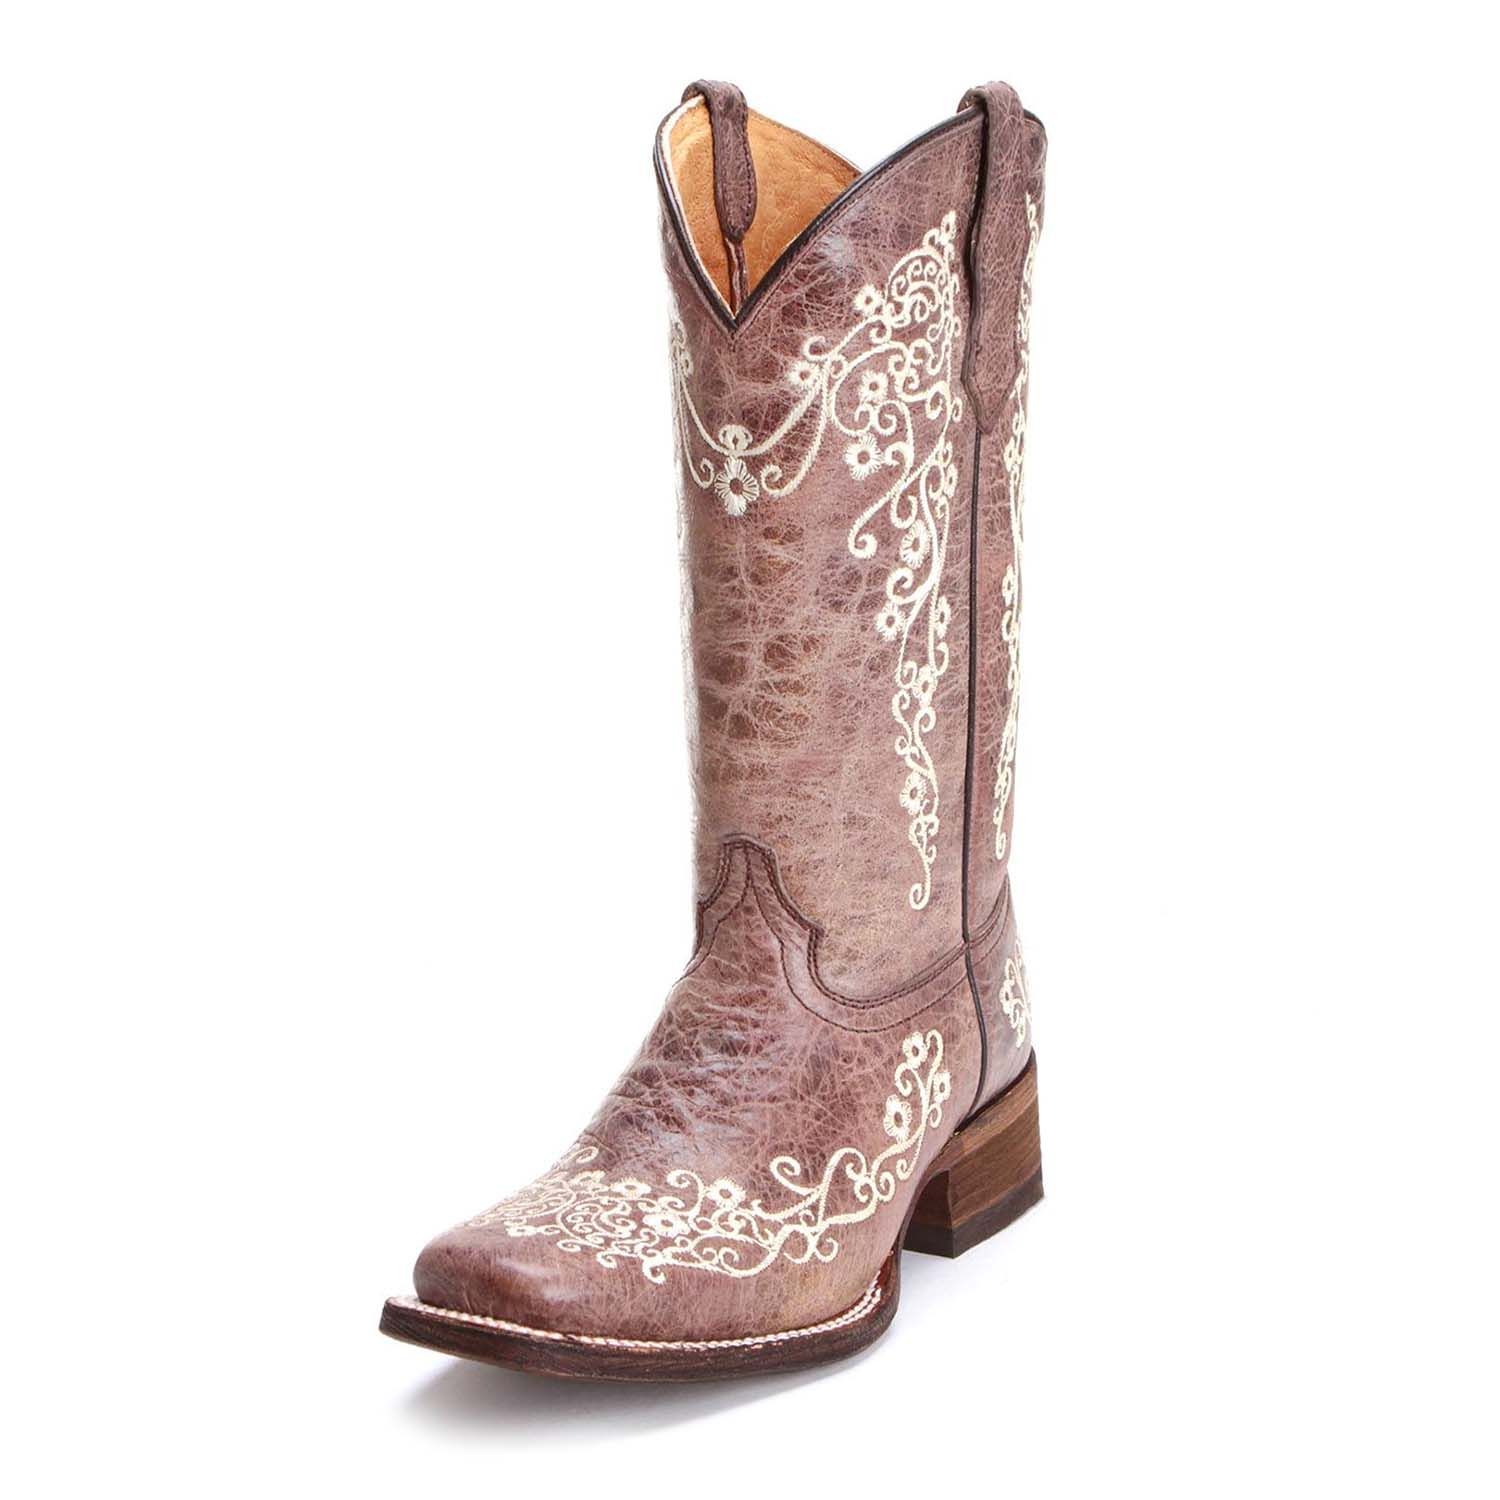 Girls Kids Brown Floral Embroidery Stitched Genuine Leather Western Cowboy Boots 